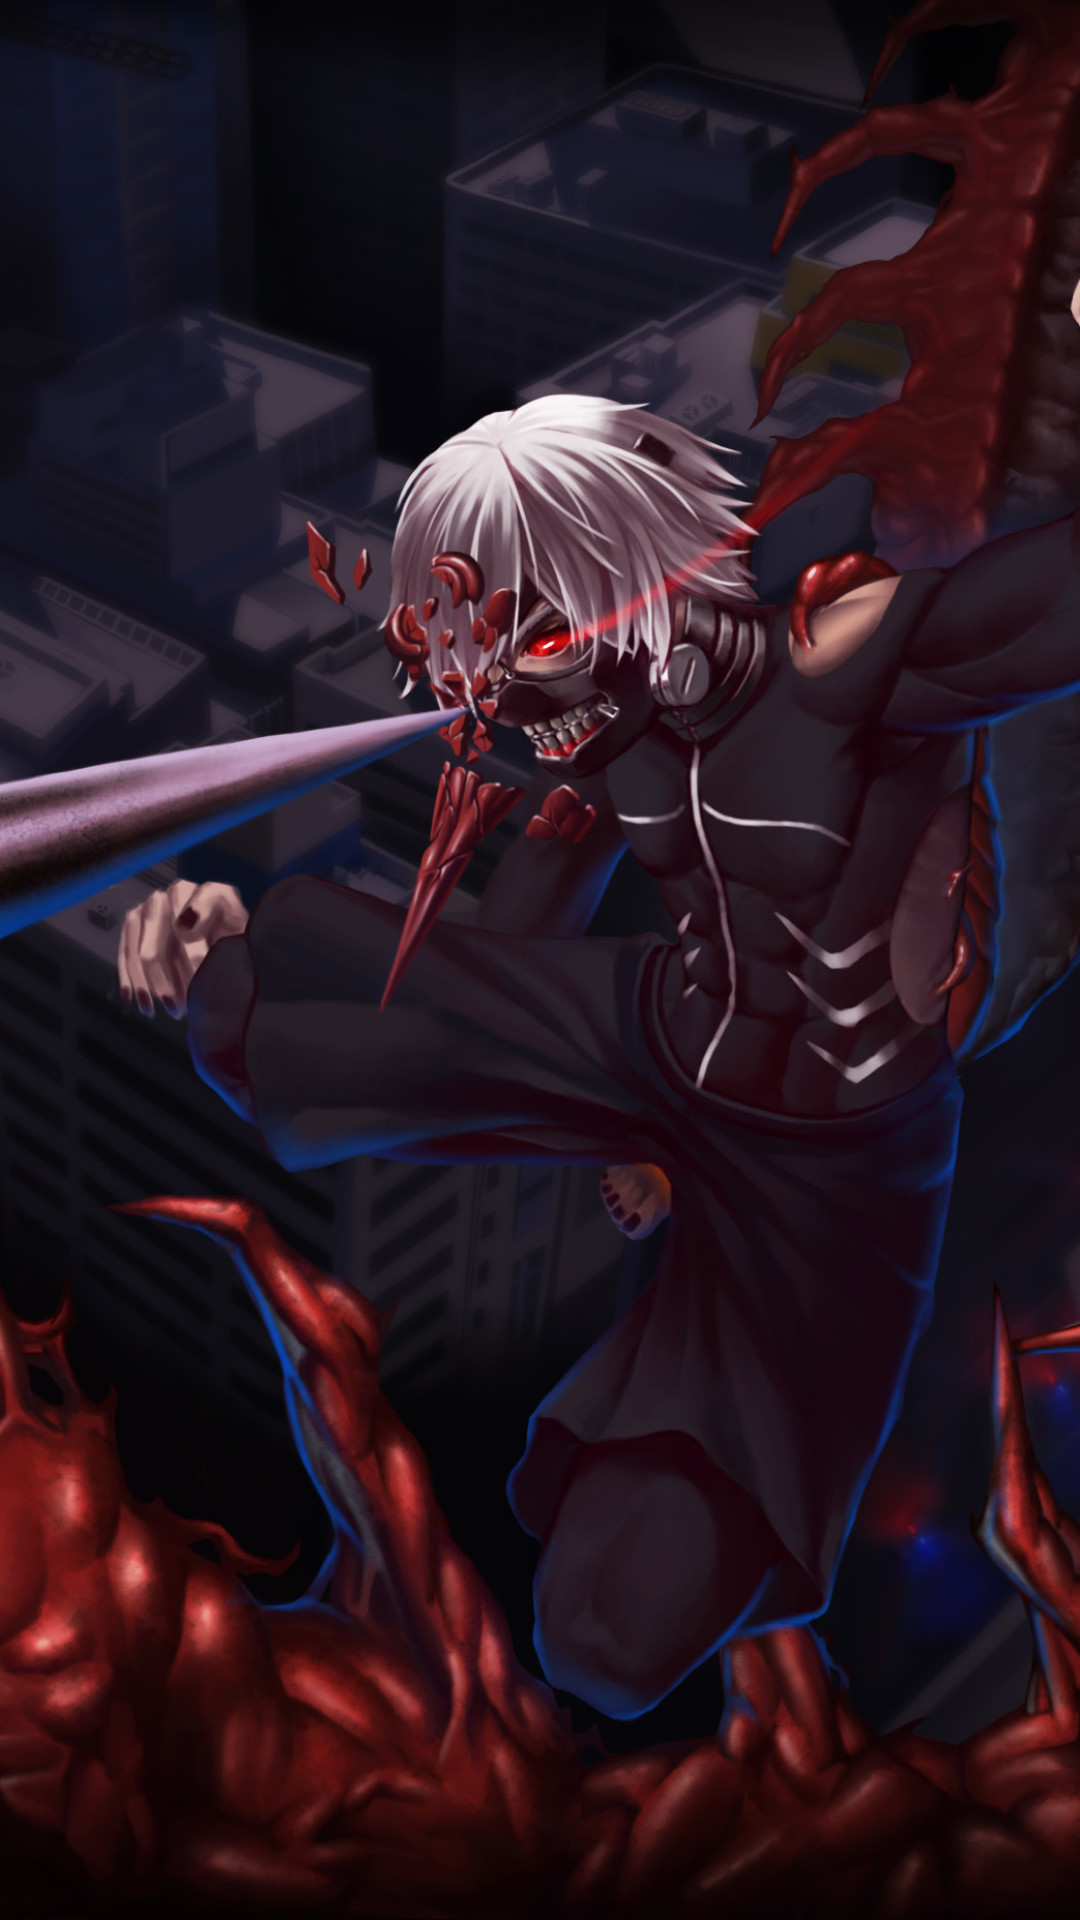 Tokyo Ghoul Character Wallpaper (74+ images)